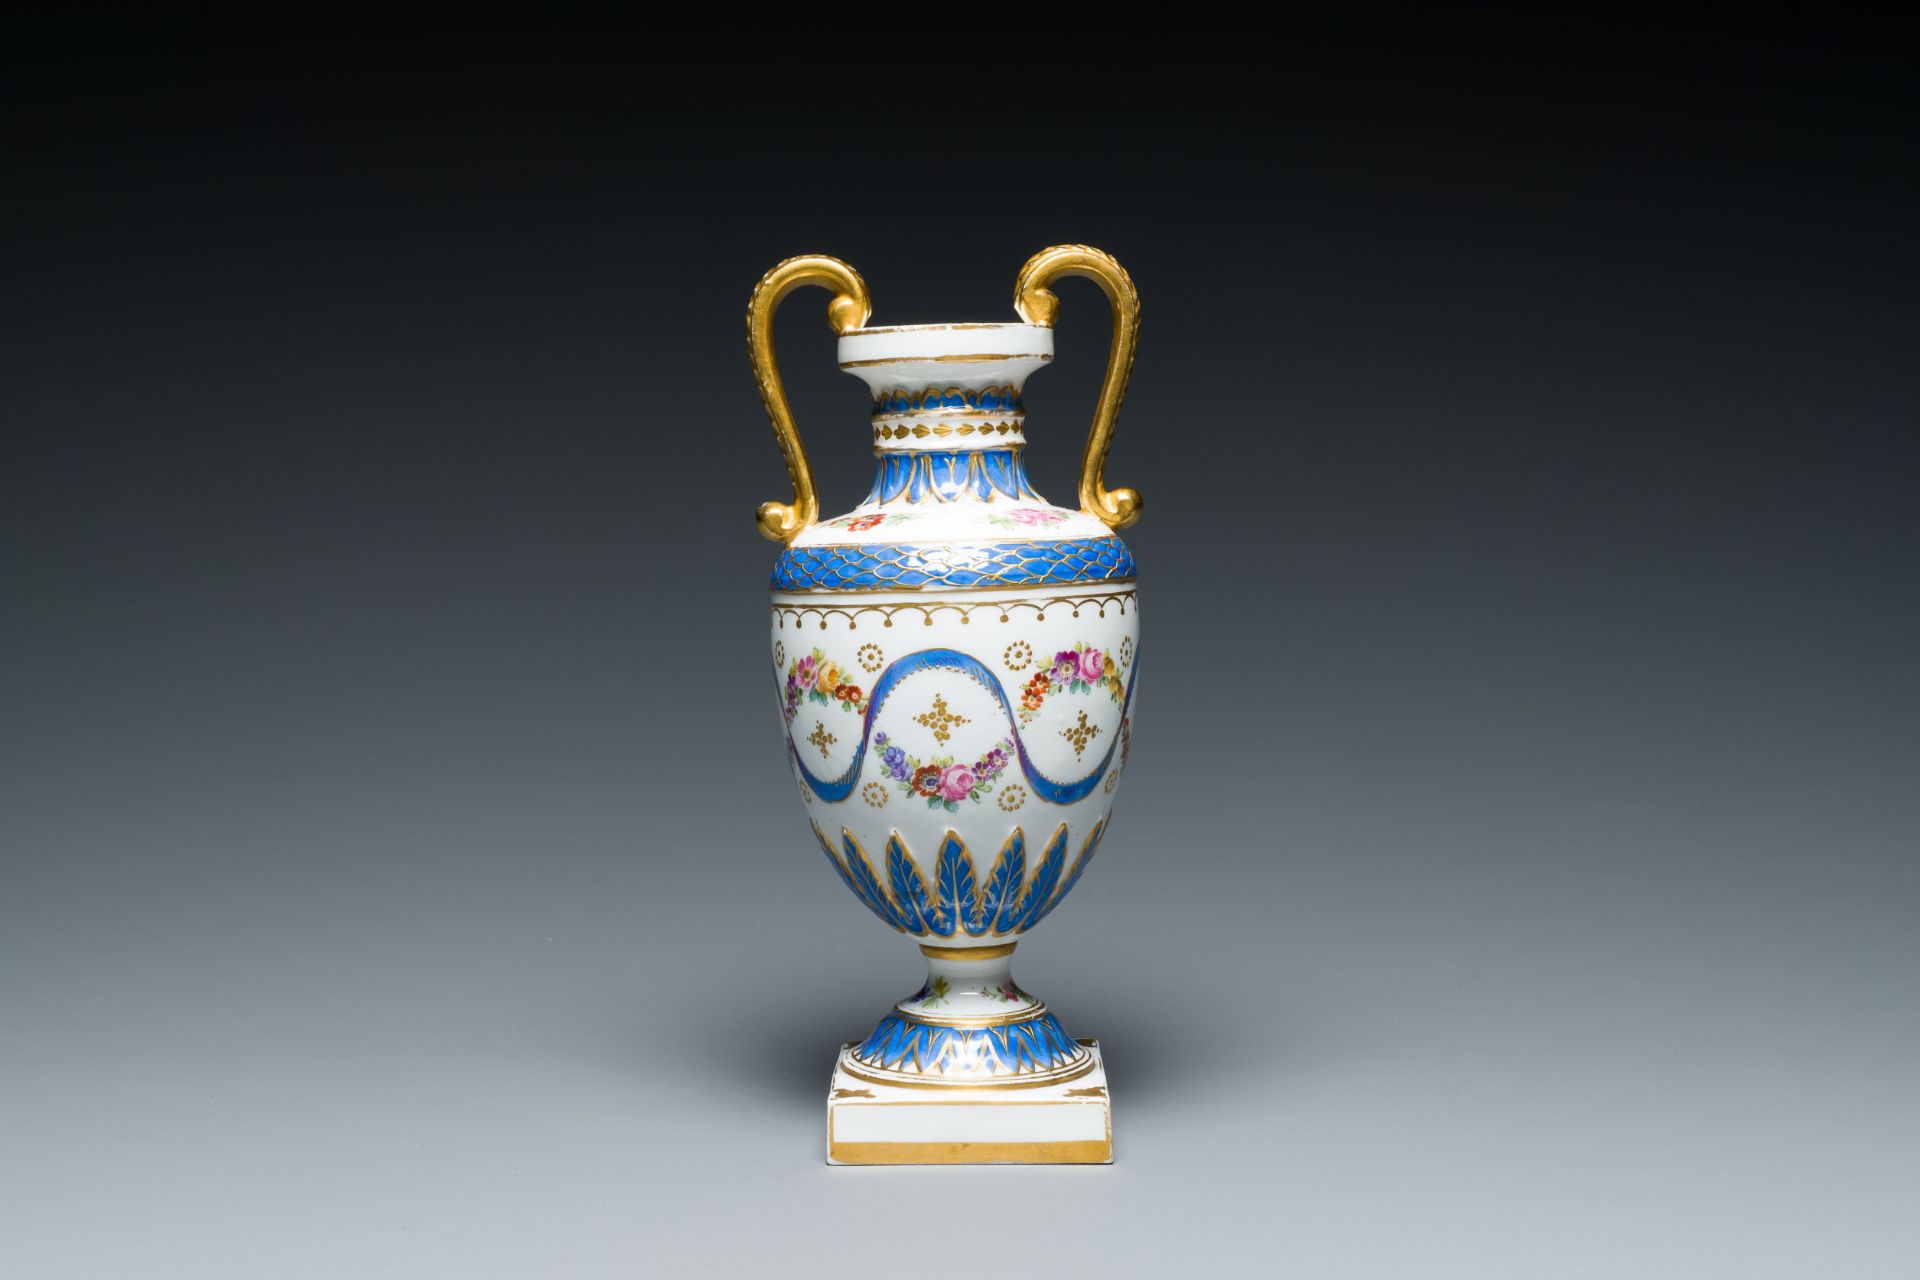 A French polychrome porcelain Sevres-style vase, 19th C.